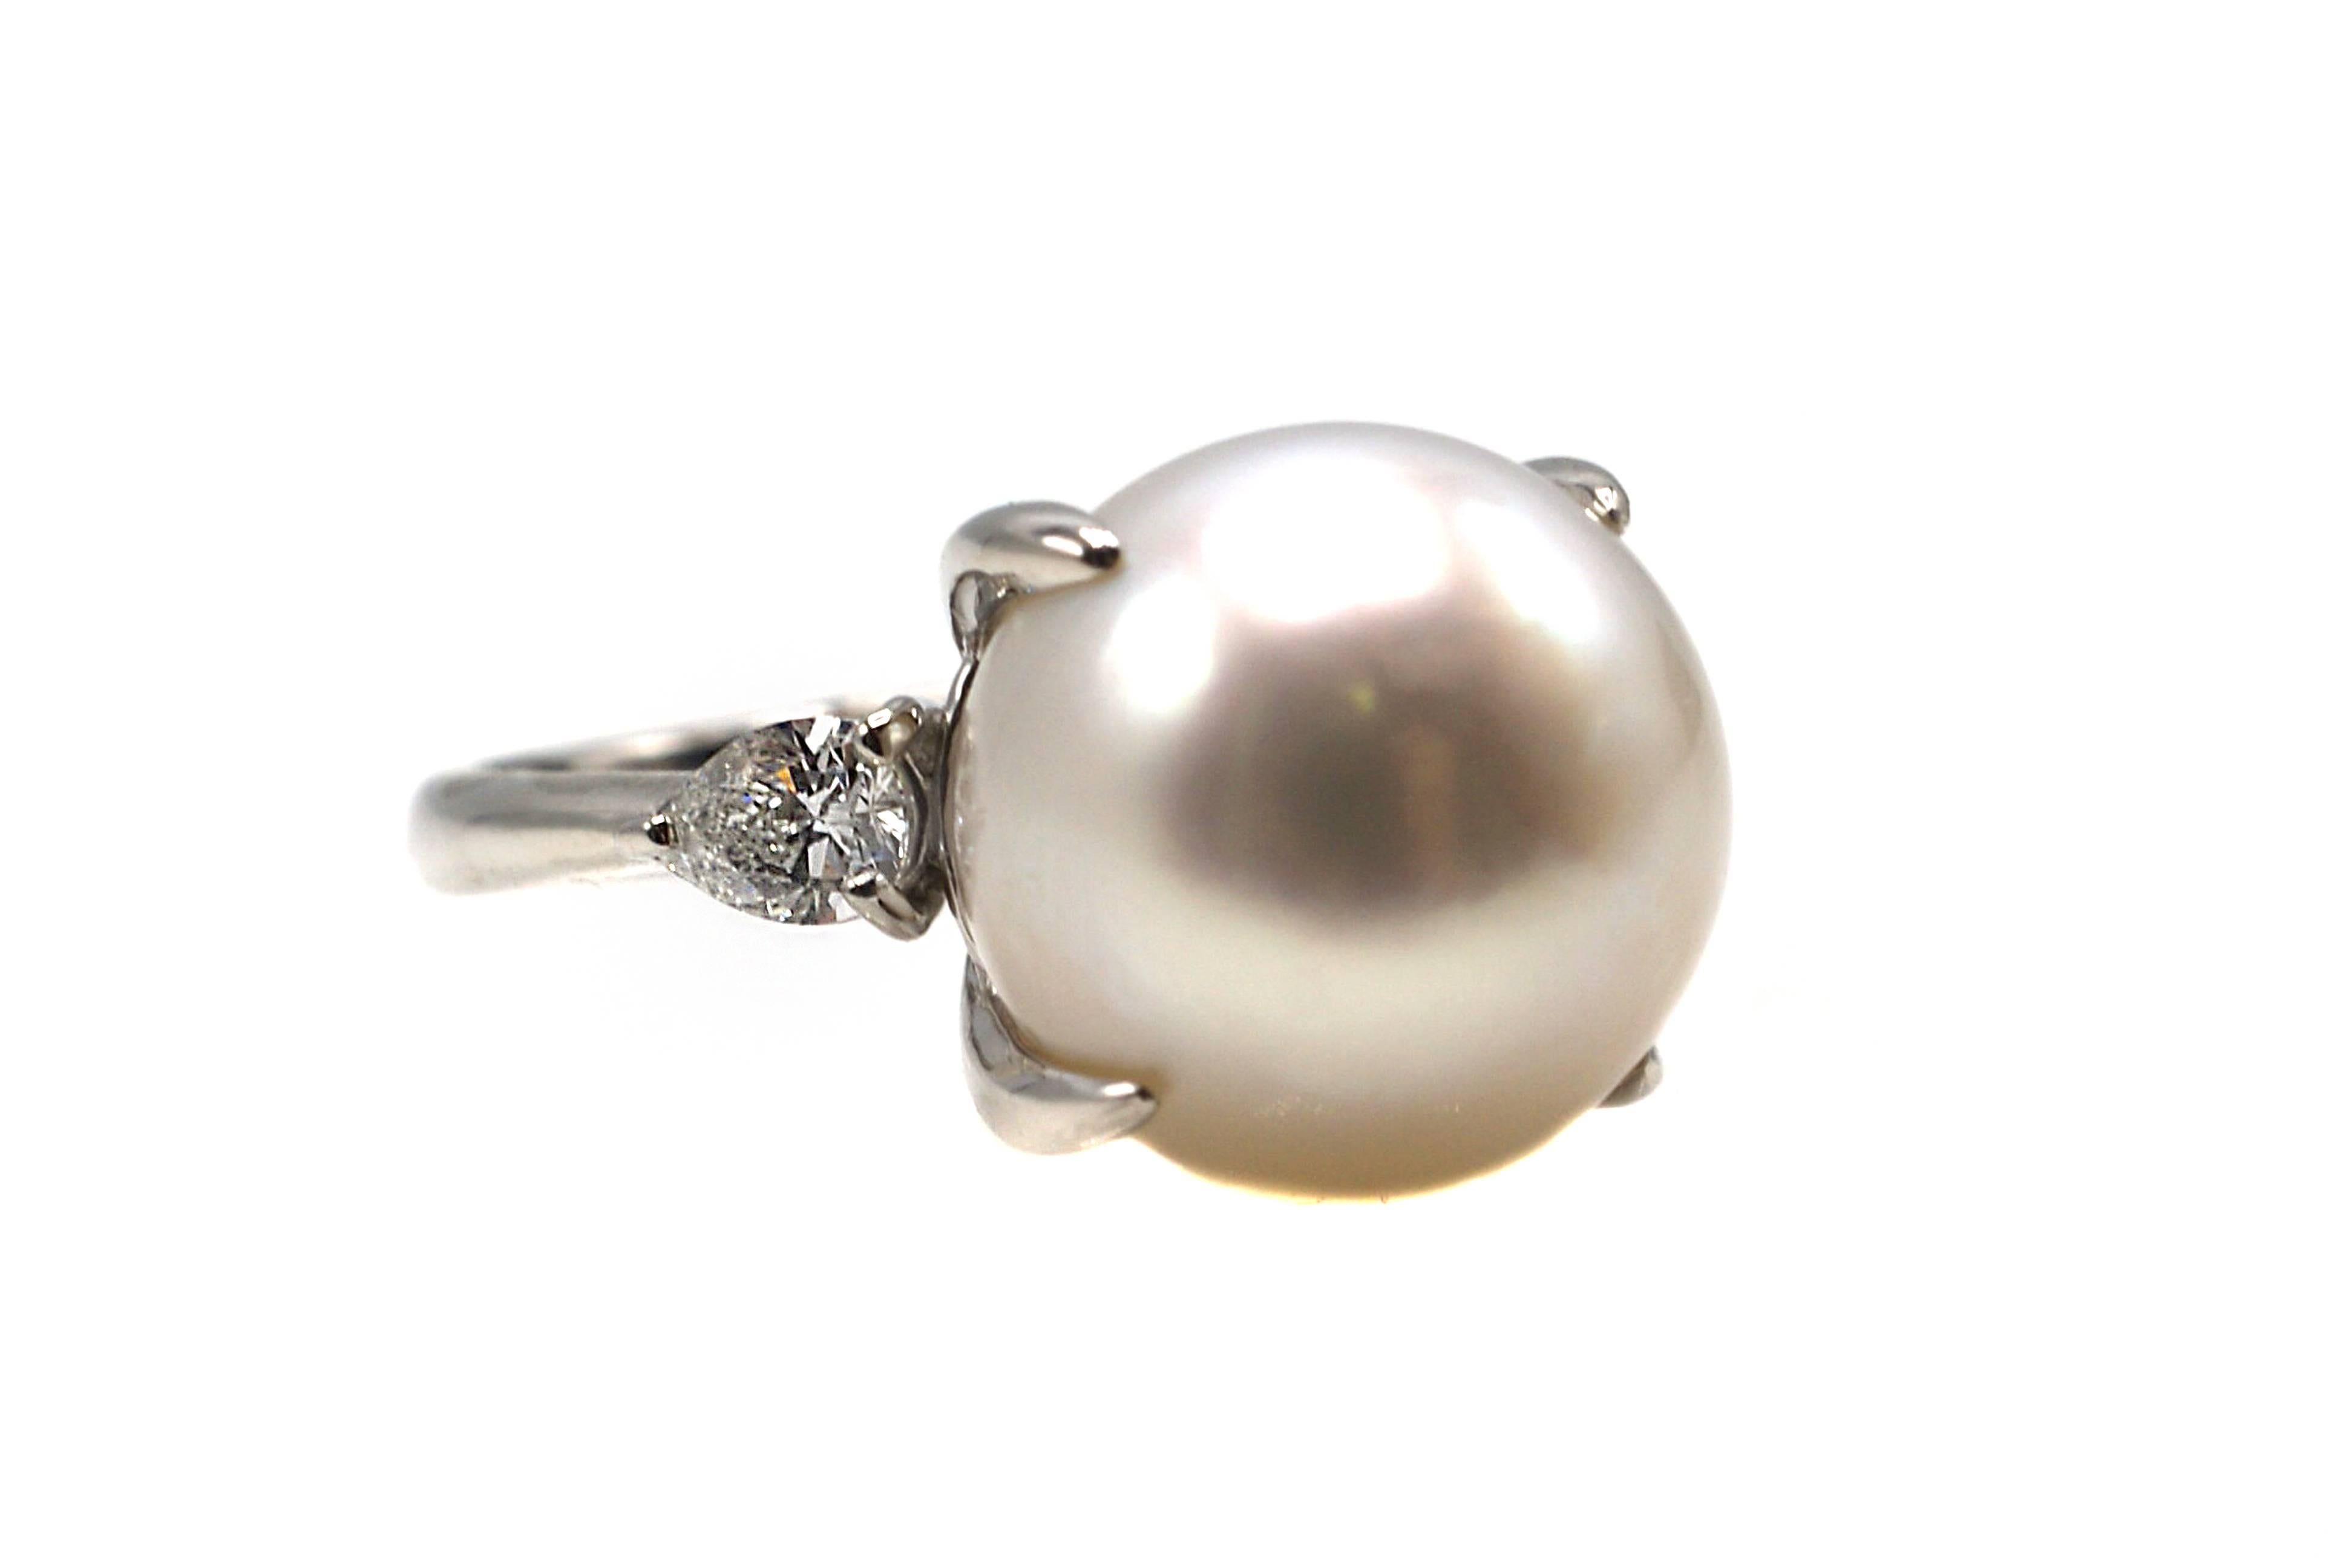 This ring features a centrally set exquisite 12 millimeter bright white and lustrous South Sea pearl set in a handcrafted platinum mounting.Only many years of culturing this pearl in the oyster gives it the thick nacre to make it this shiny and